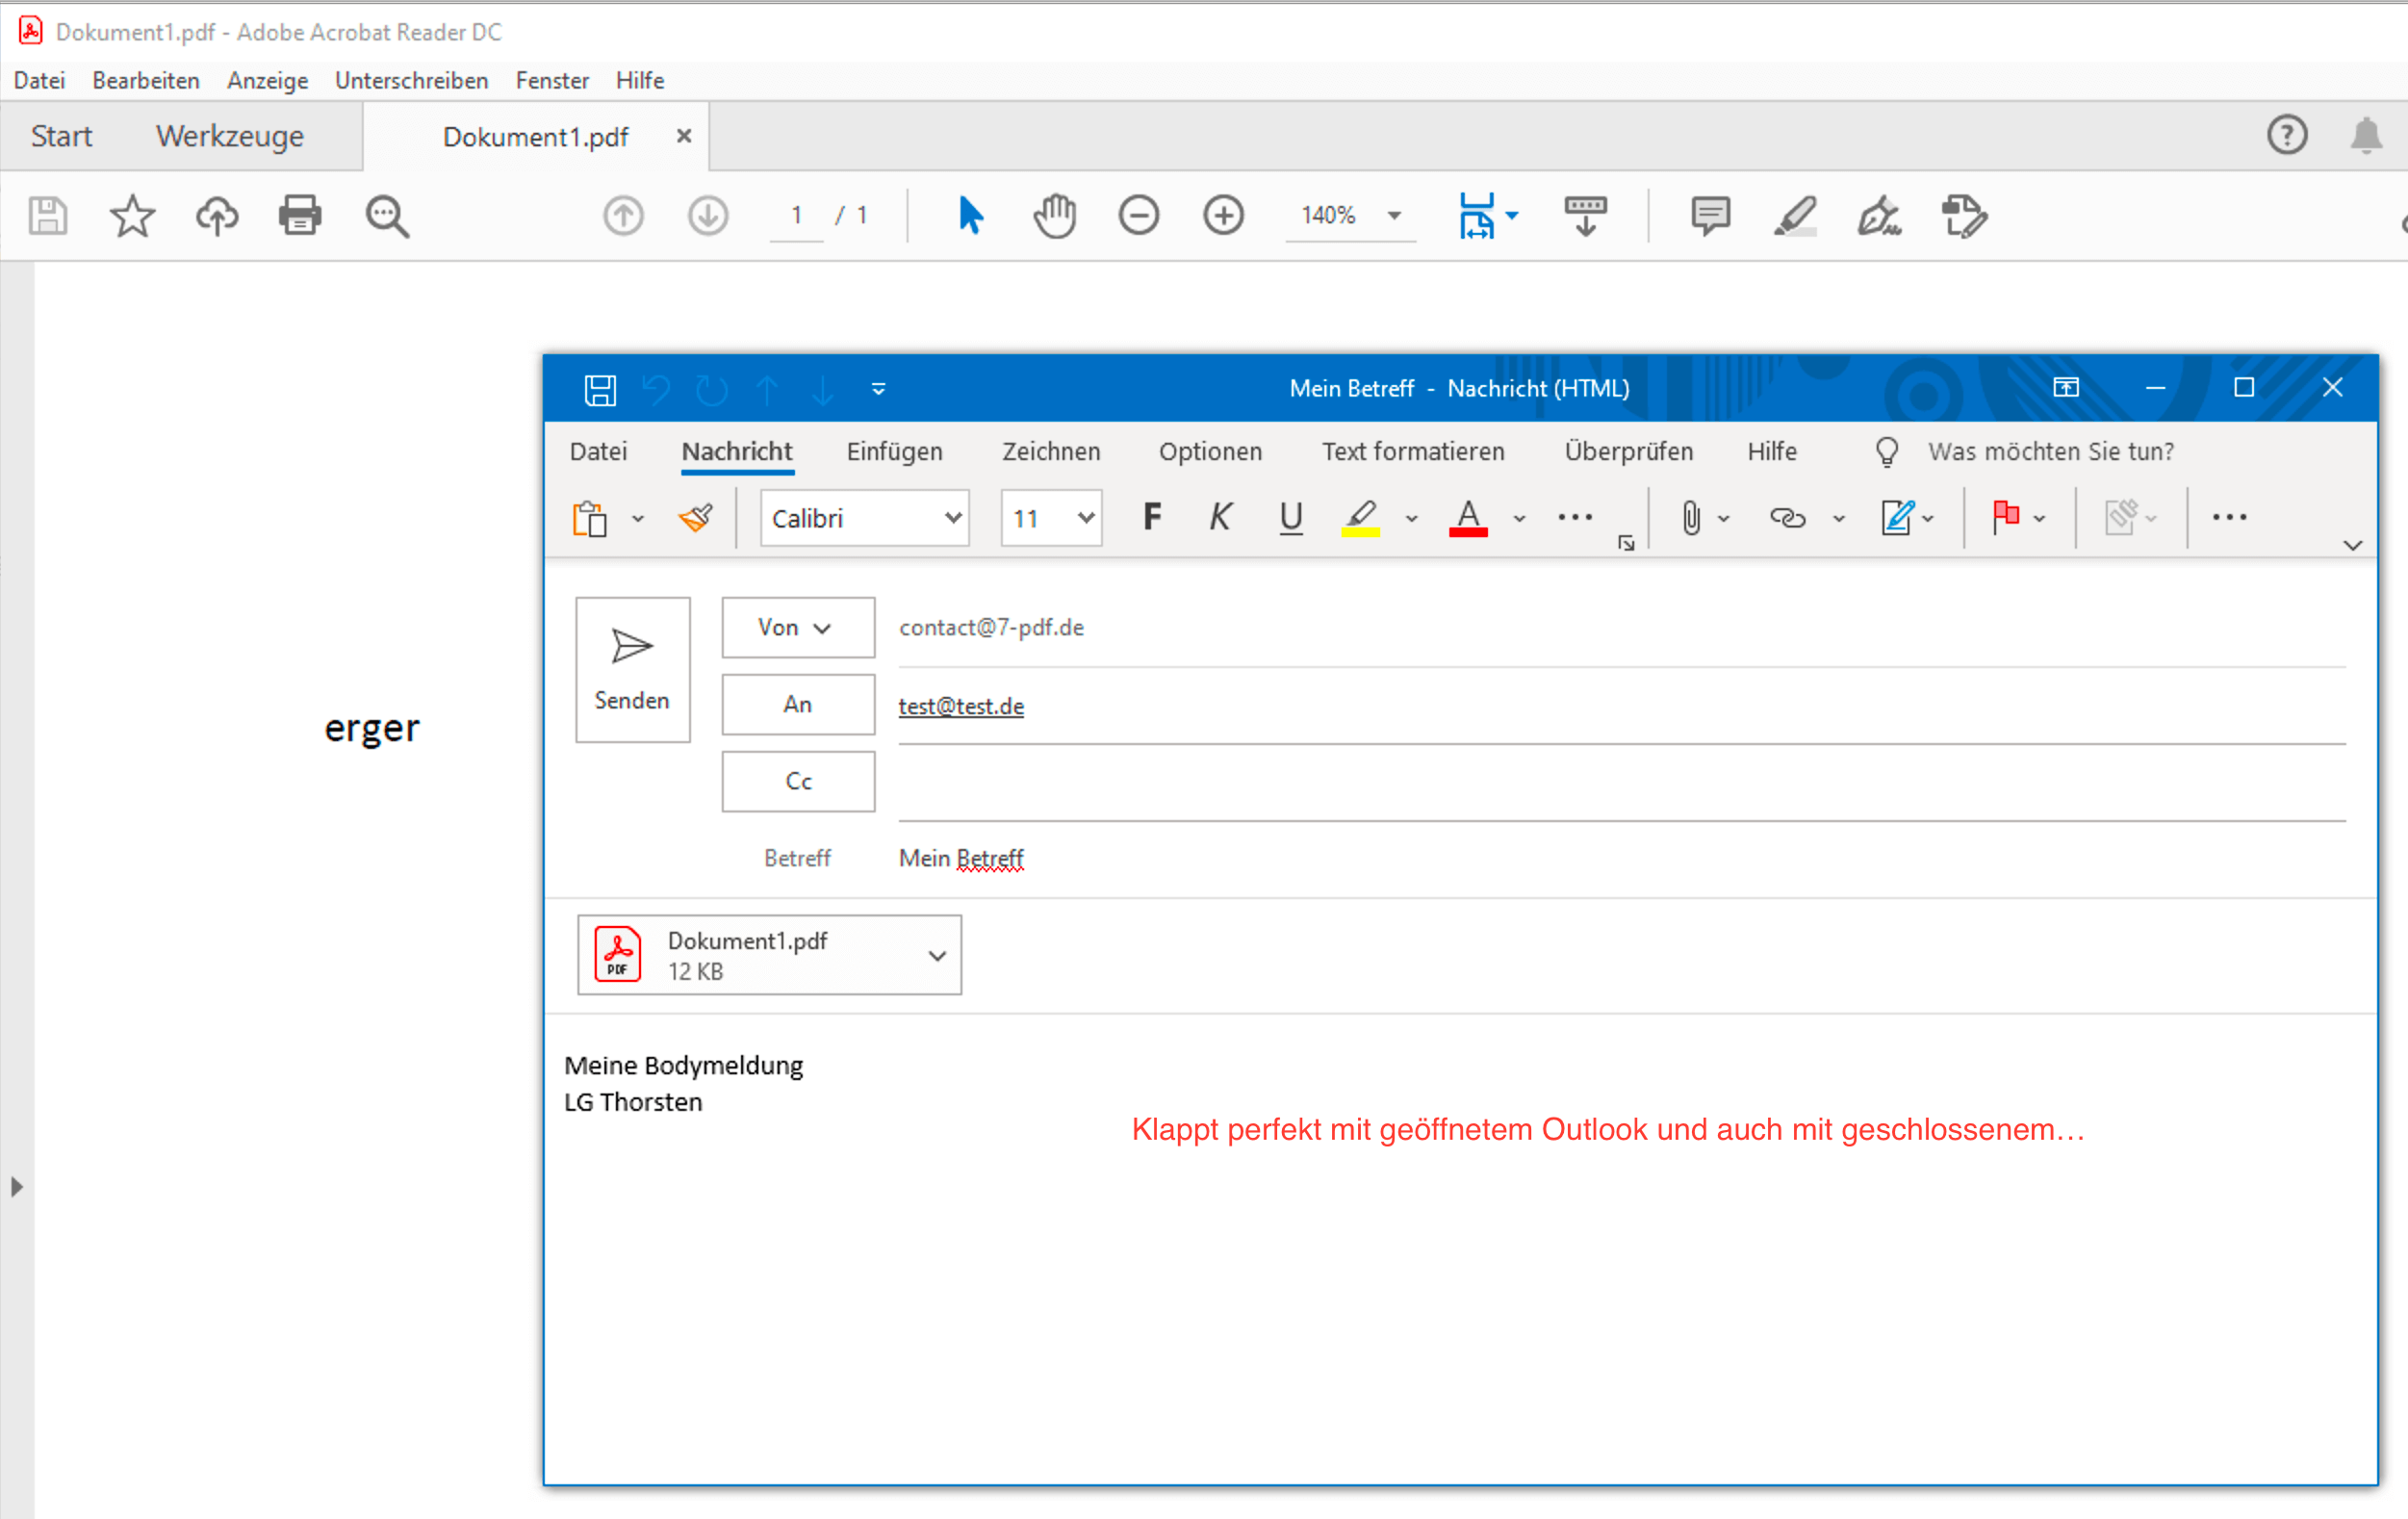 Outlook email with PDF file attachment opens automatically